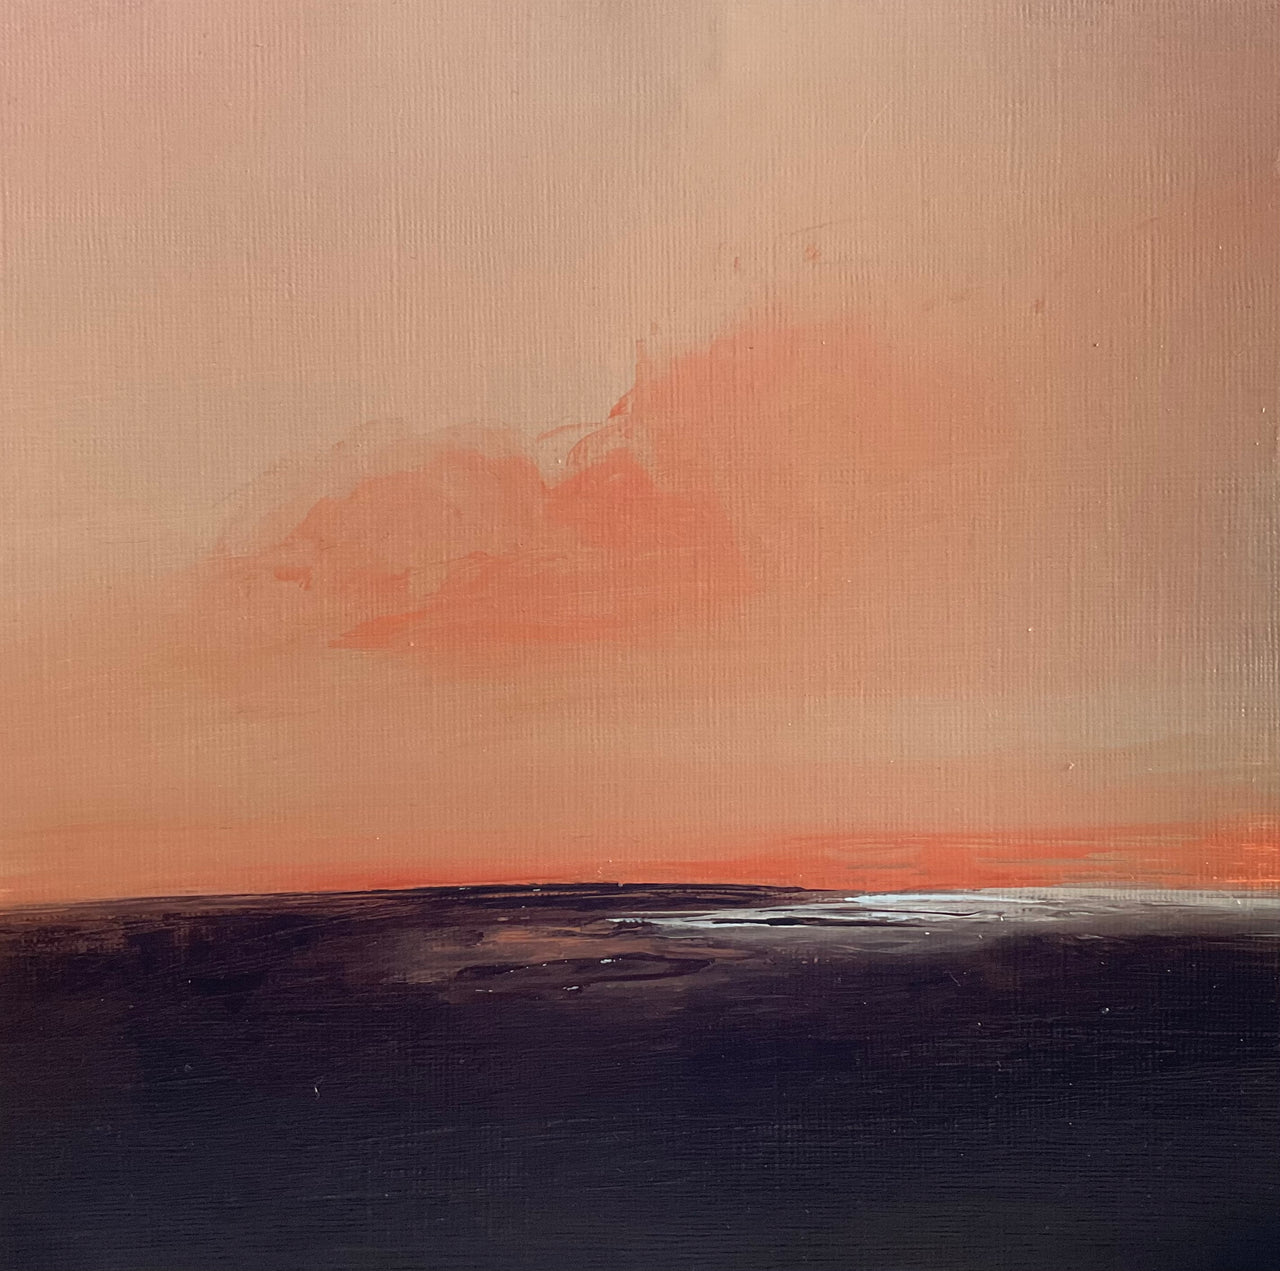 Cornish artist Nicola Mosley dusky pink sky with dark tones of the headland and shimmering ocean